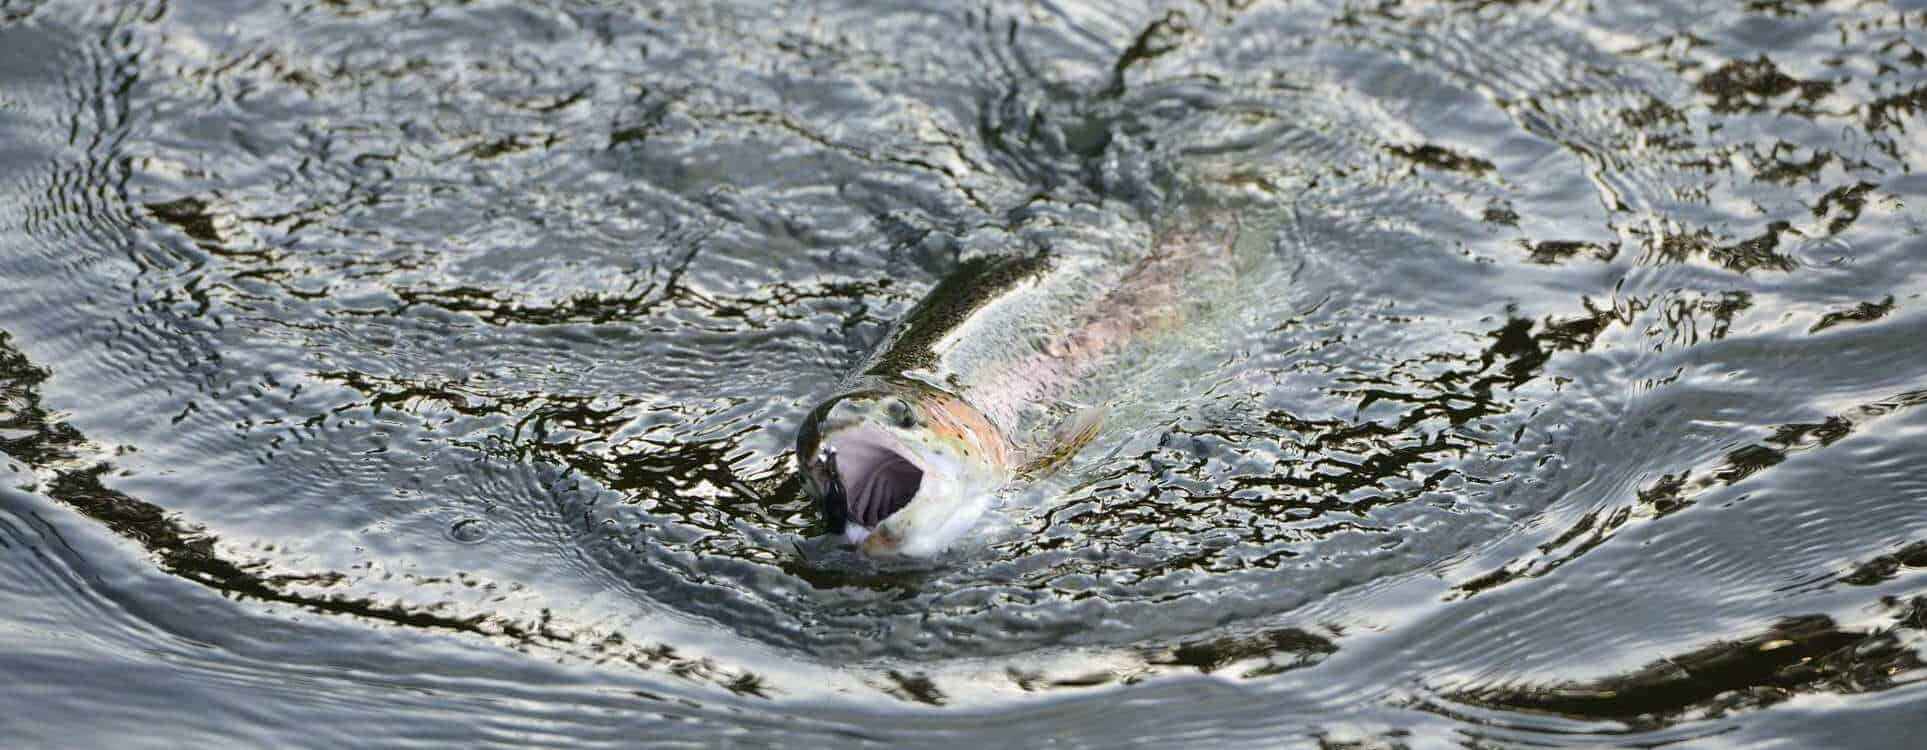 Salmon fishing holidays at Kinloch House